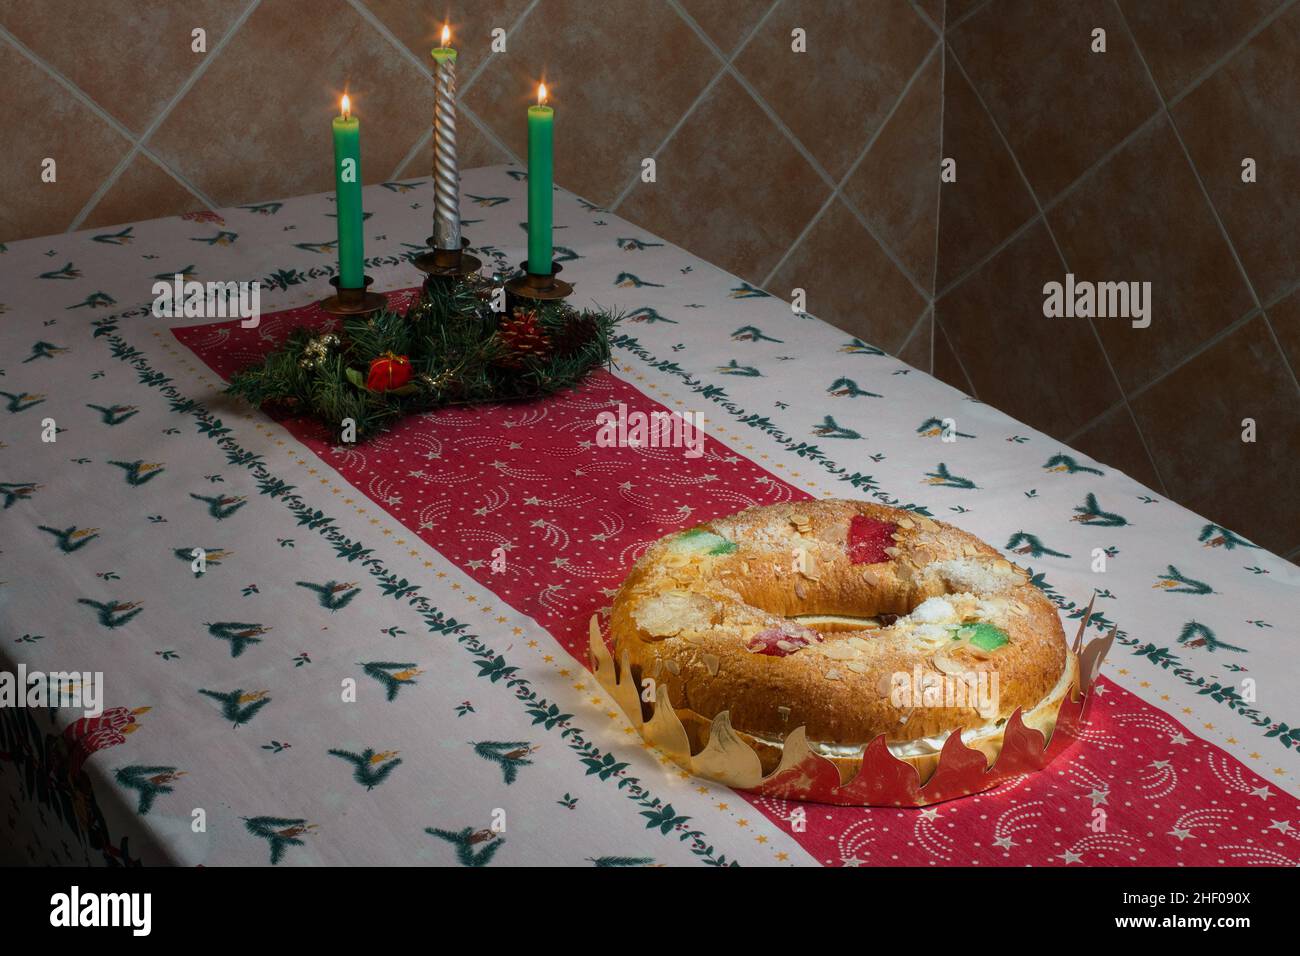 A giant donut cake filled with sweet whipped cream and chocolate truffle with candied fruit, almonds, and icing sugar on a Christmas tablecloth with l Stock Photo